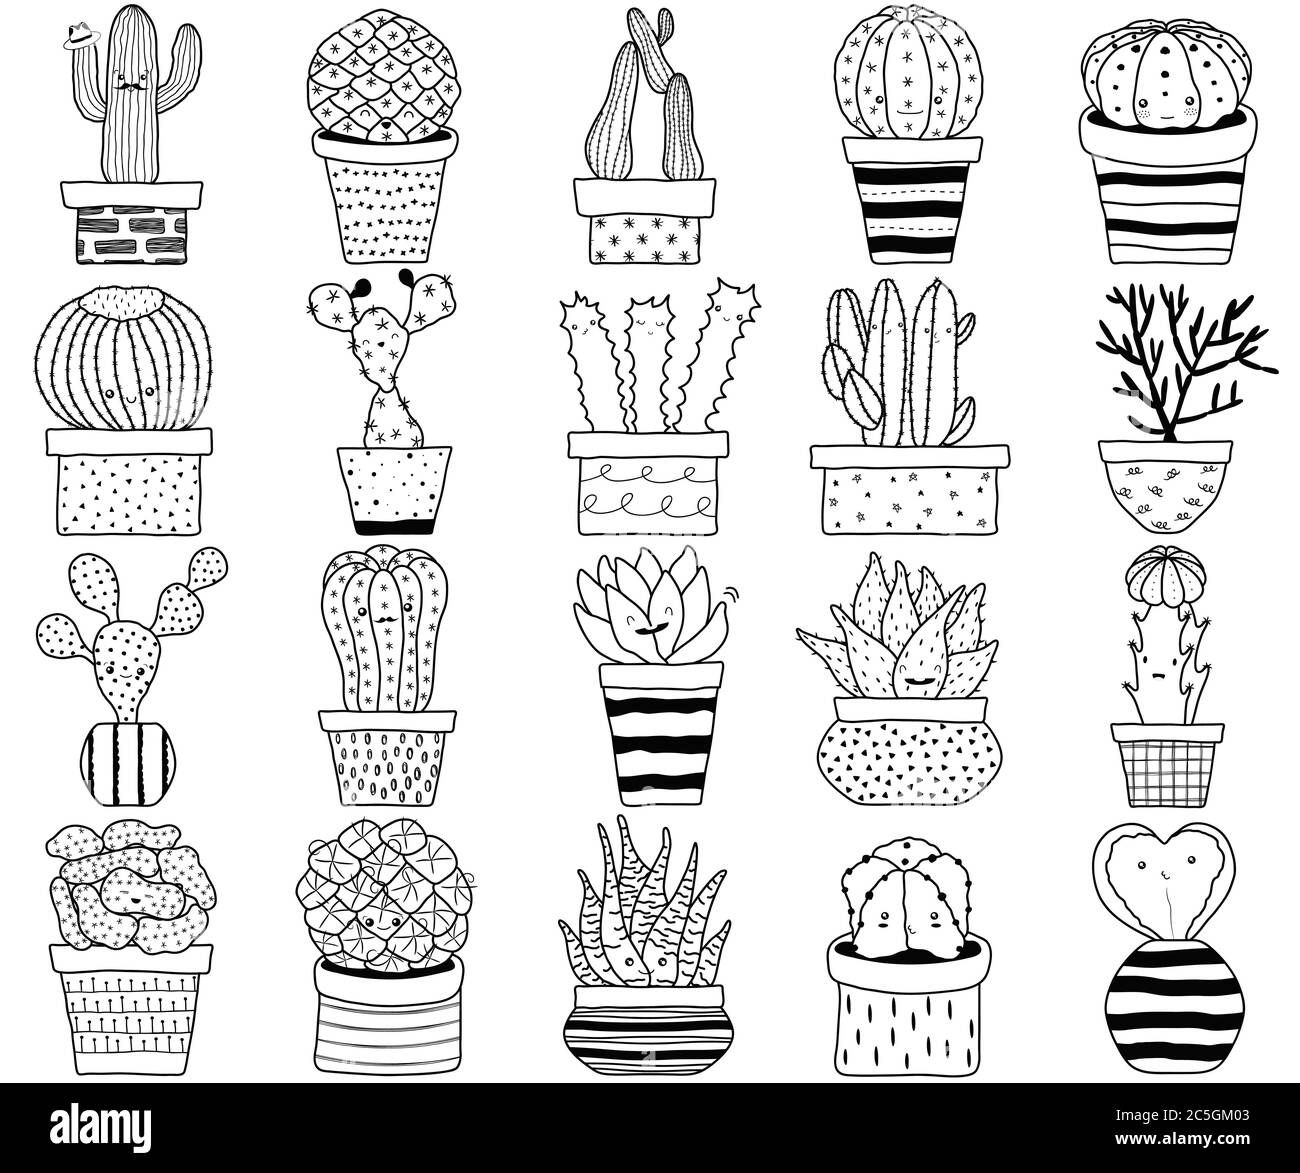 Vector set of cactus cacti aloe succulent plants with face in pot. Collection of doodle black white hand drawn exotic houseplant. Cute illustration is Stock Vector